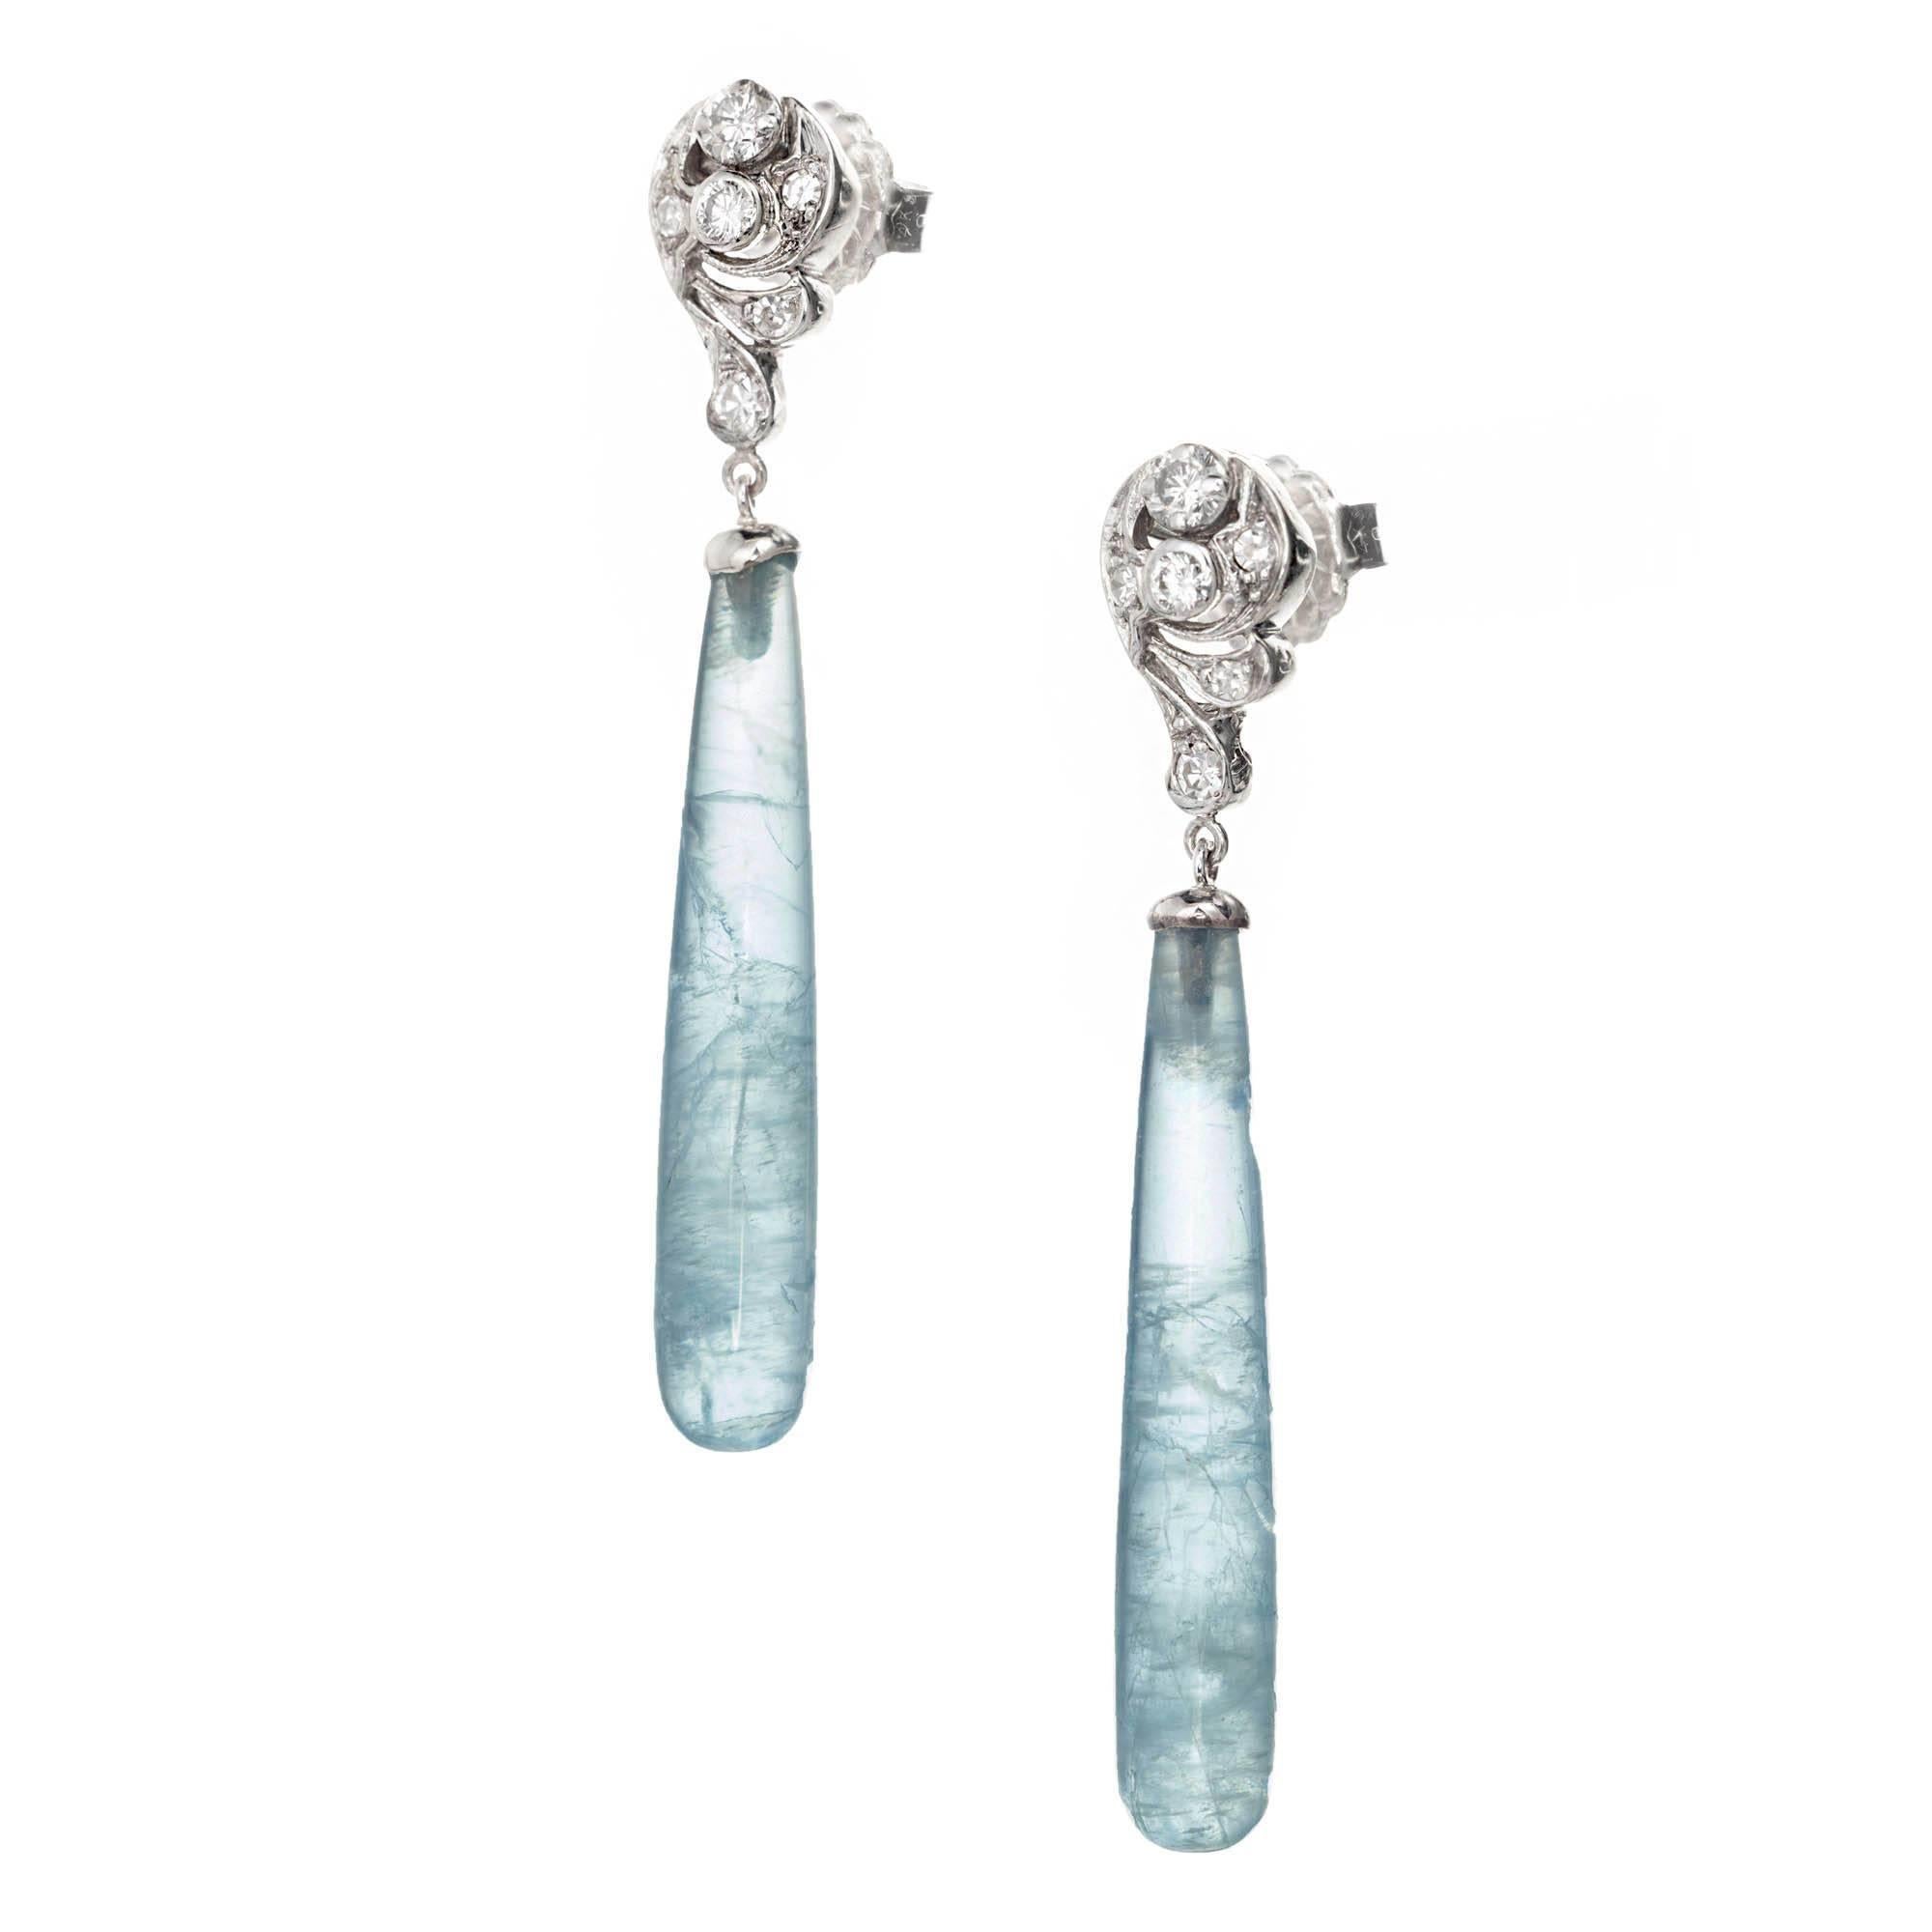 Vintage 1940s Art Deco tear drop cylinder natural aquamarine and dimaond dangle earrings in 14k white gold with bright sparkly diamonds and untreated aqua dangles

2 teardrop aquamarines light blue MI 32 x 59mm approximate 16.70 carats
12 round